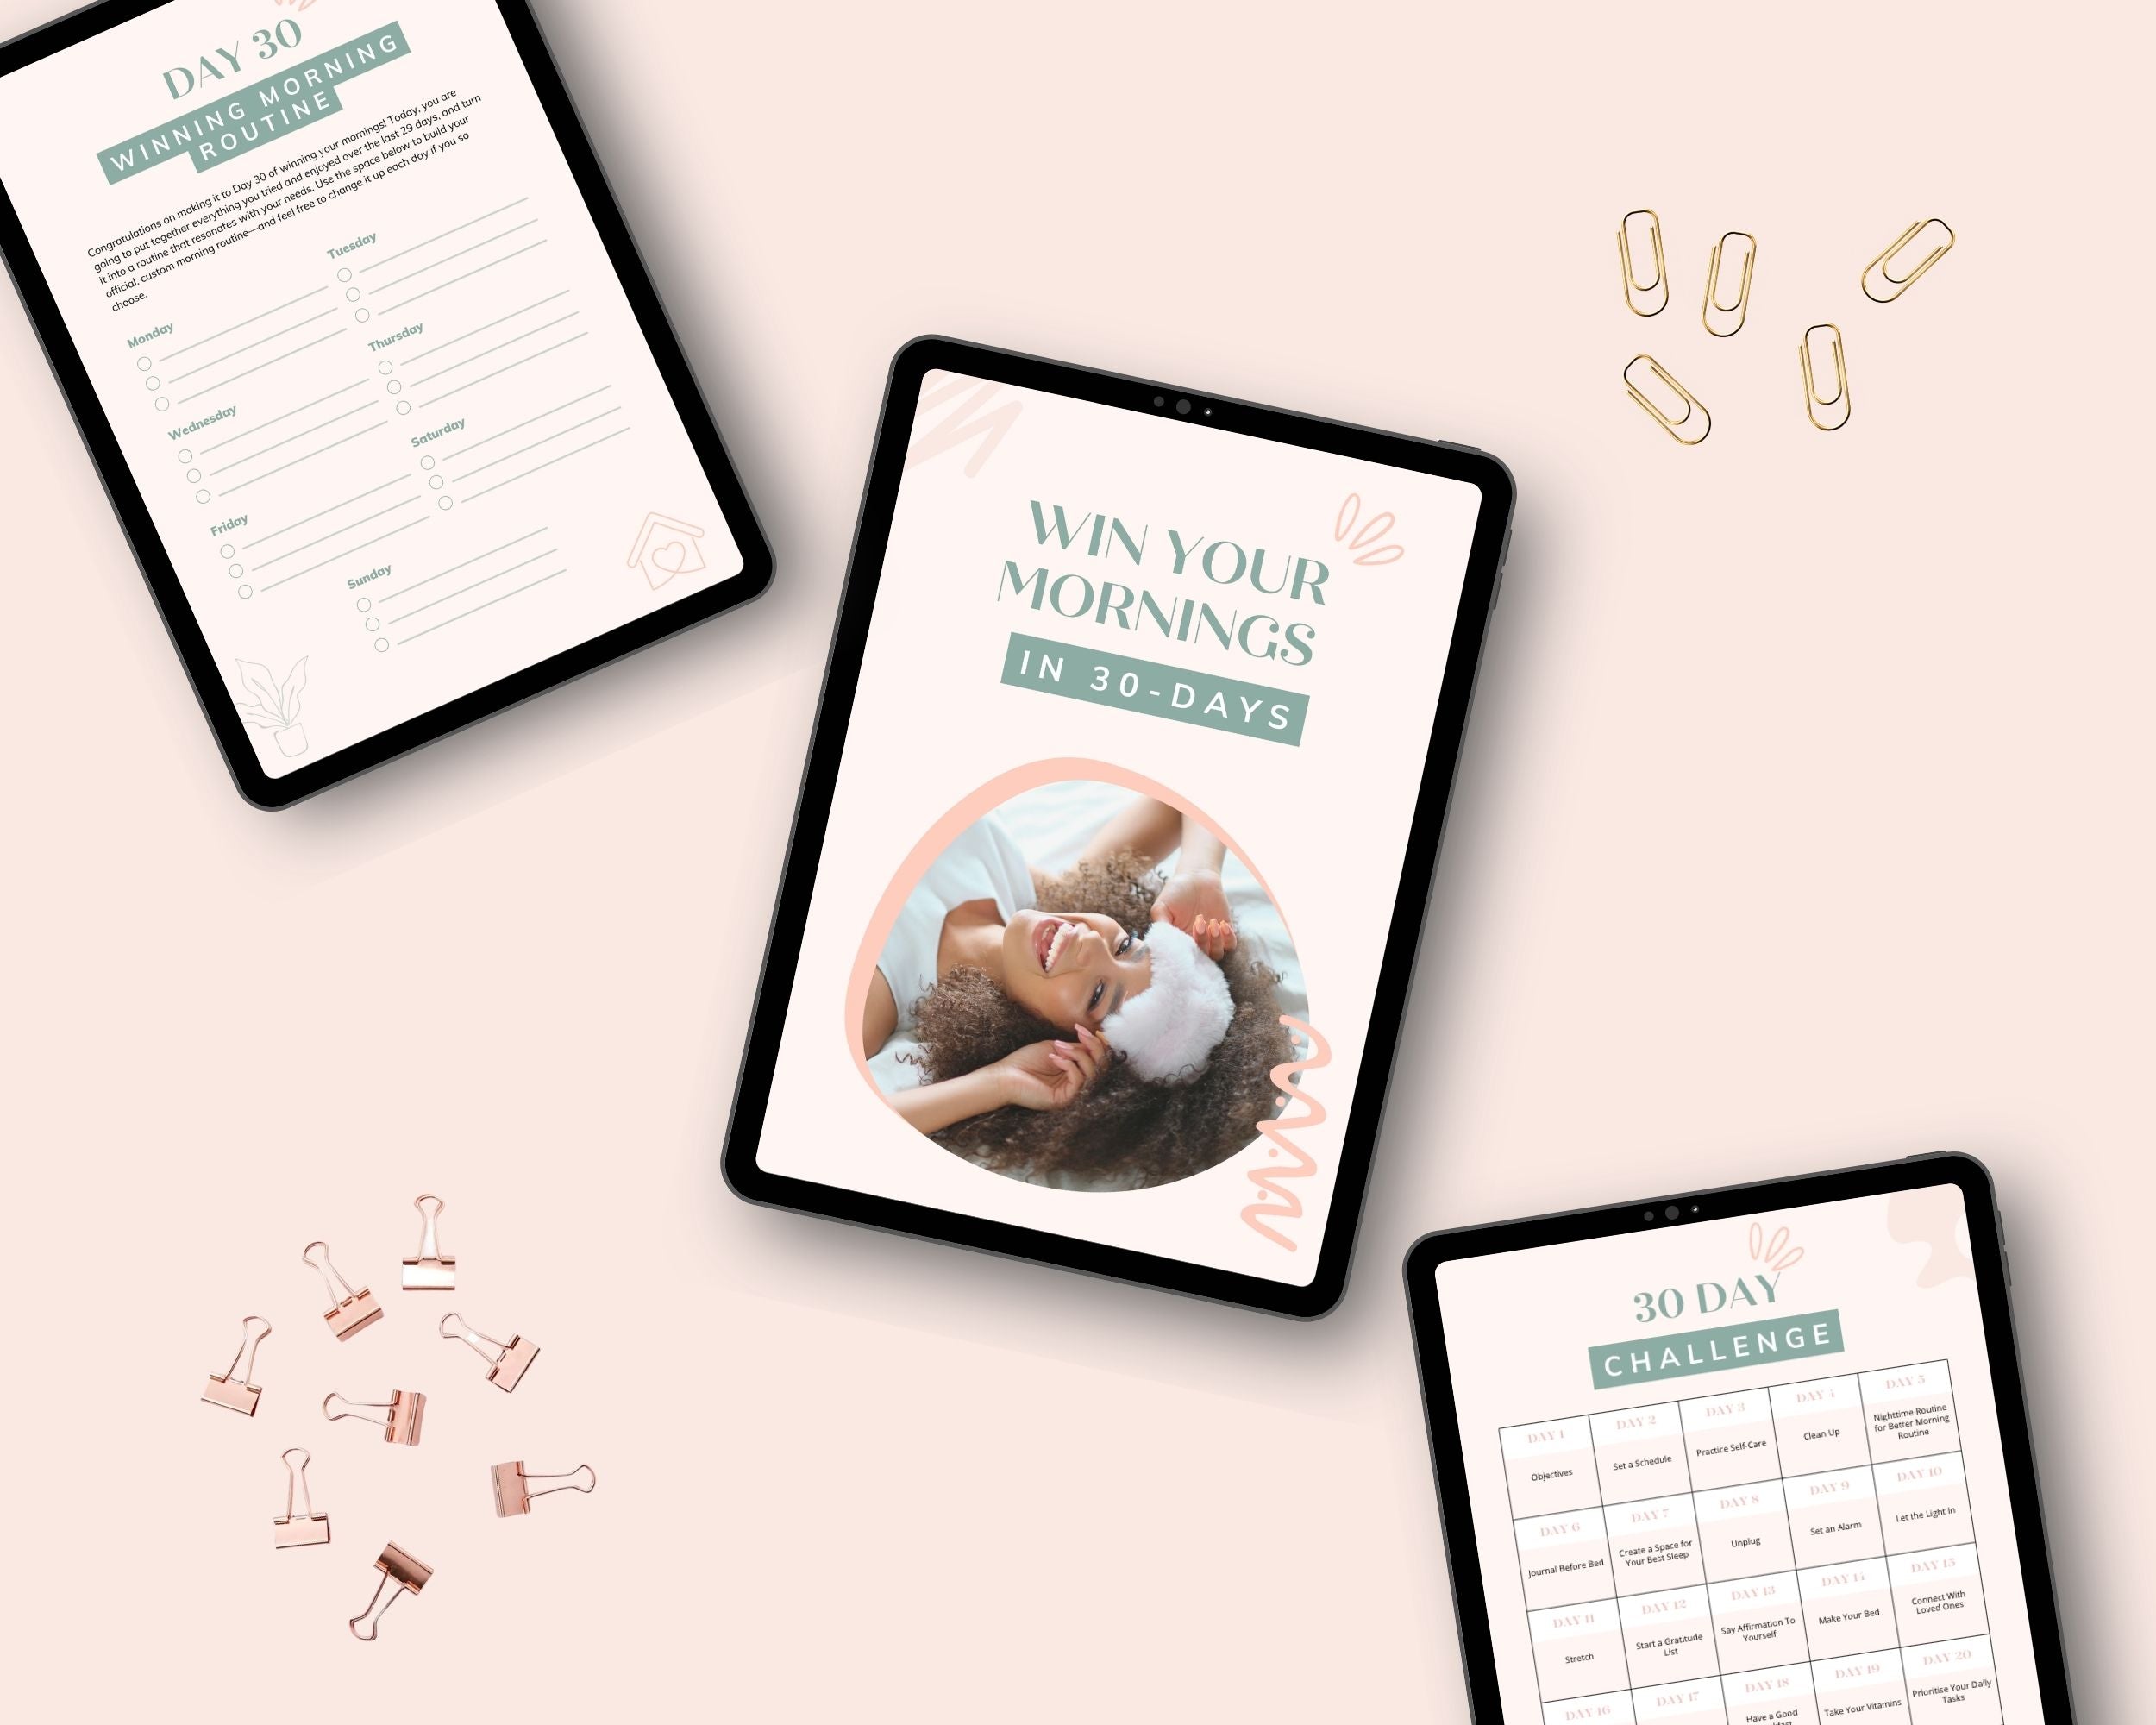 30-Day Win Your Mornings Challenge | Editable Canva Template A4 Size